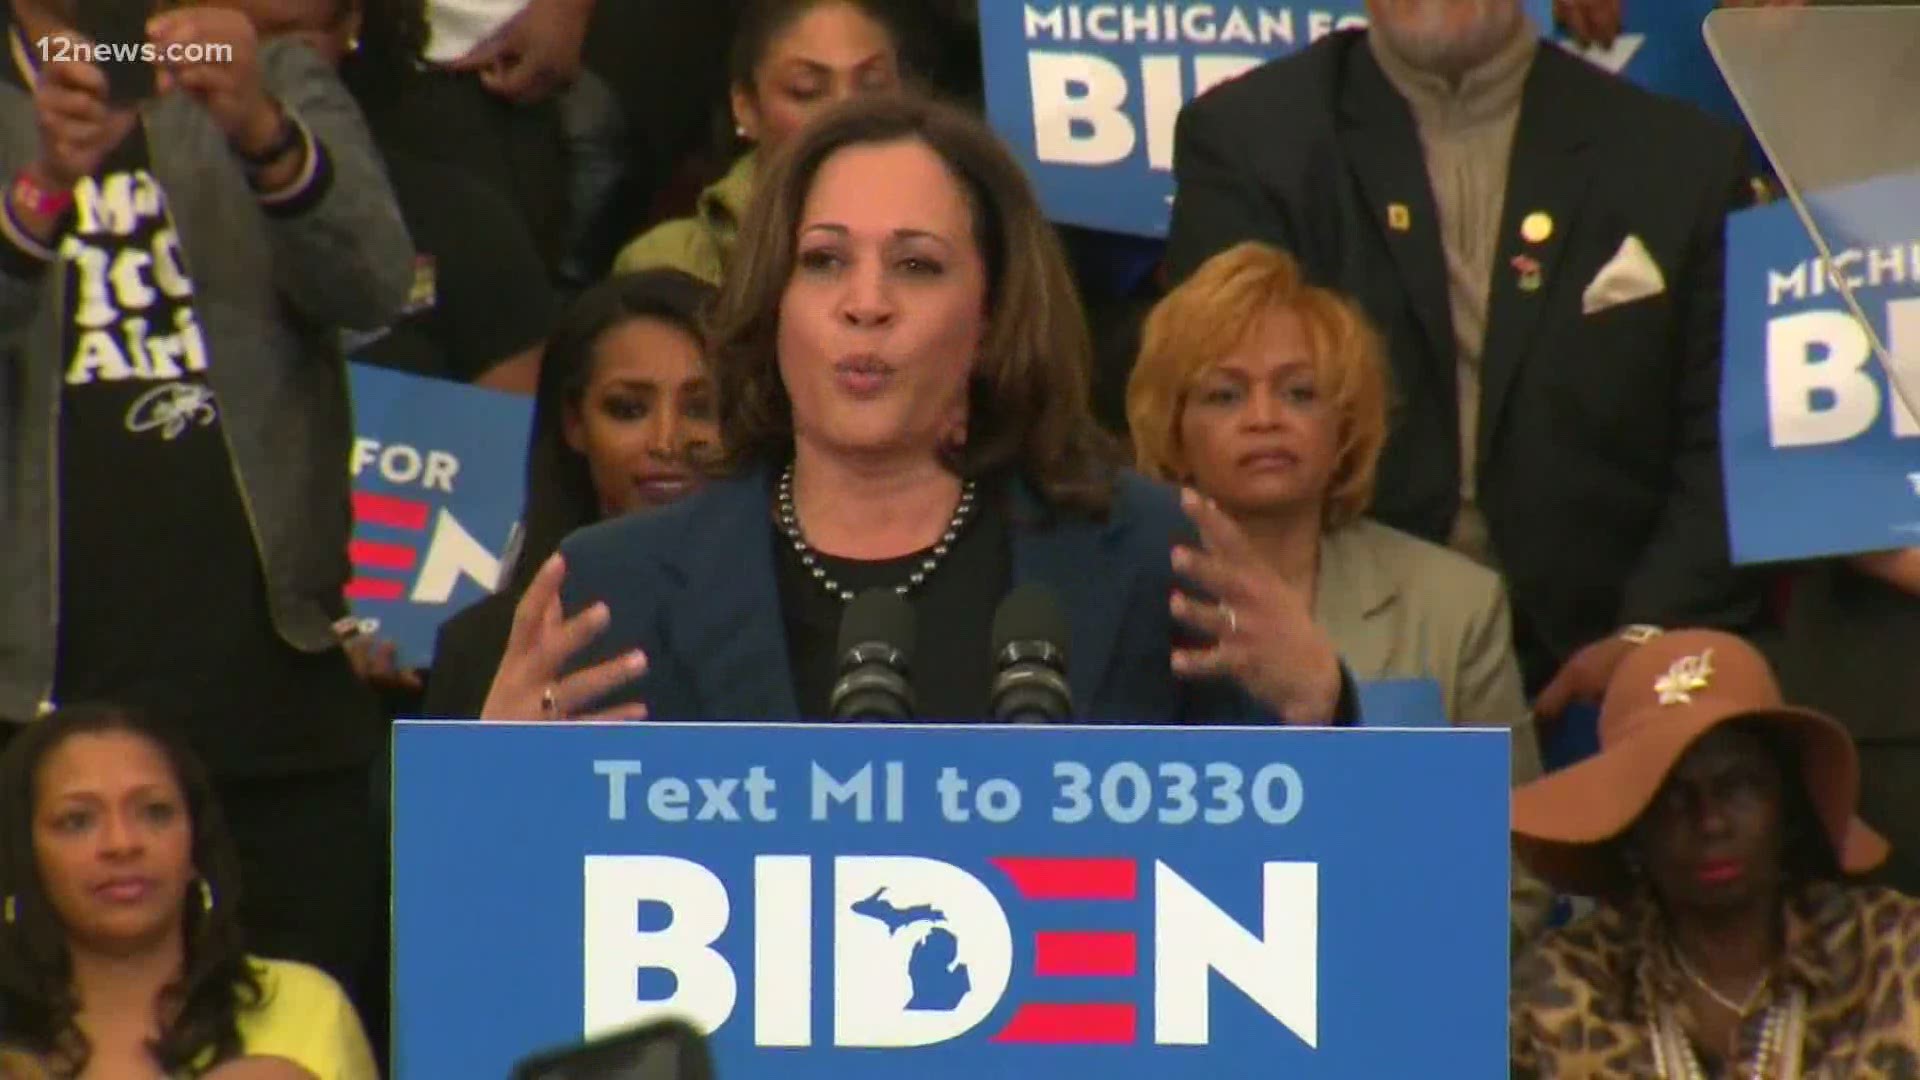 Joe Biden has named Kamala Harris as his running mate. Harris is 55 years old. She is the first Black woman to join a major party ticket.